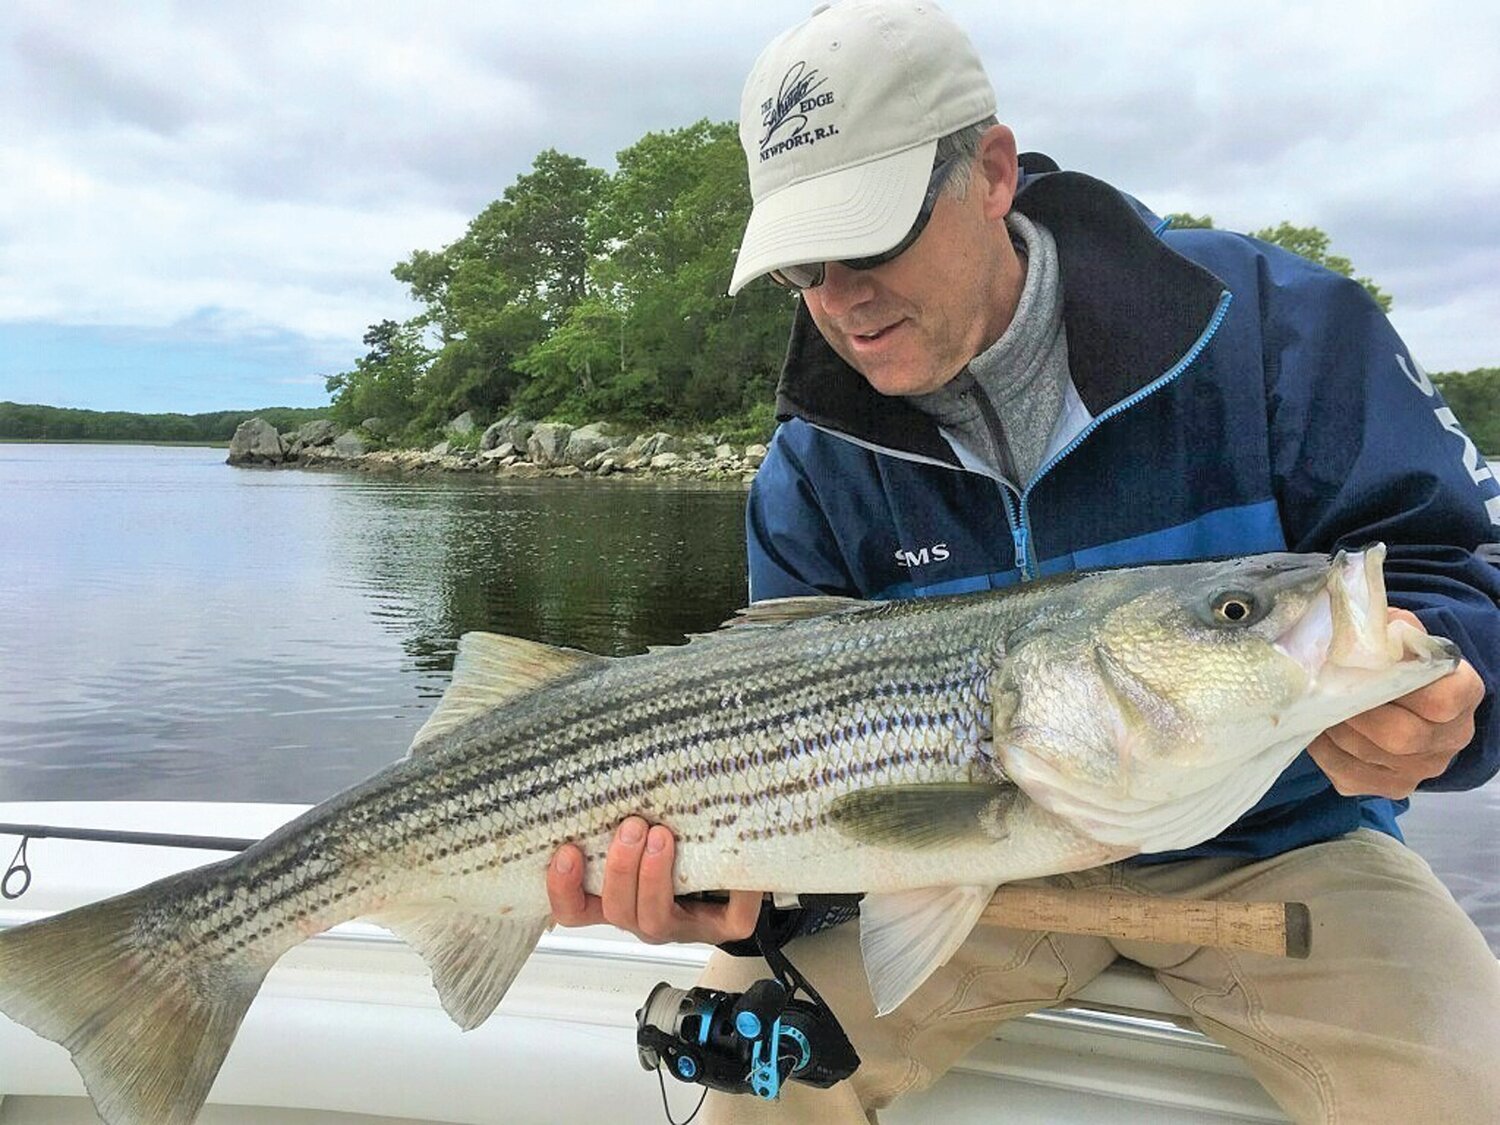 STRIPED BASS: Peter Jenkins, chairman of the board of the American Saltwater Guides Association and owner of the Saltwater Edge, Middletown says striped bass in trouble and asks anglers to take action. (Submitted photo)